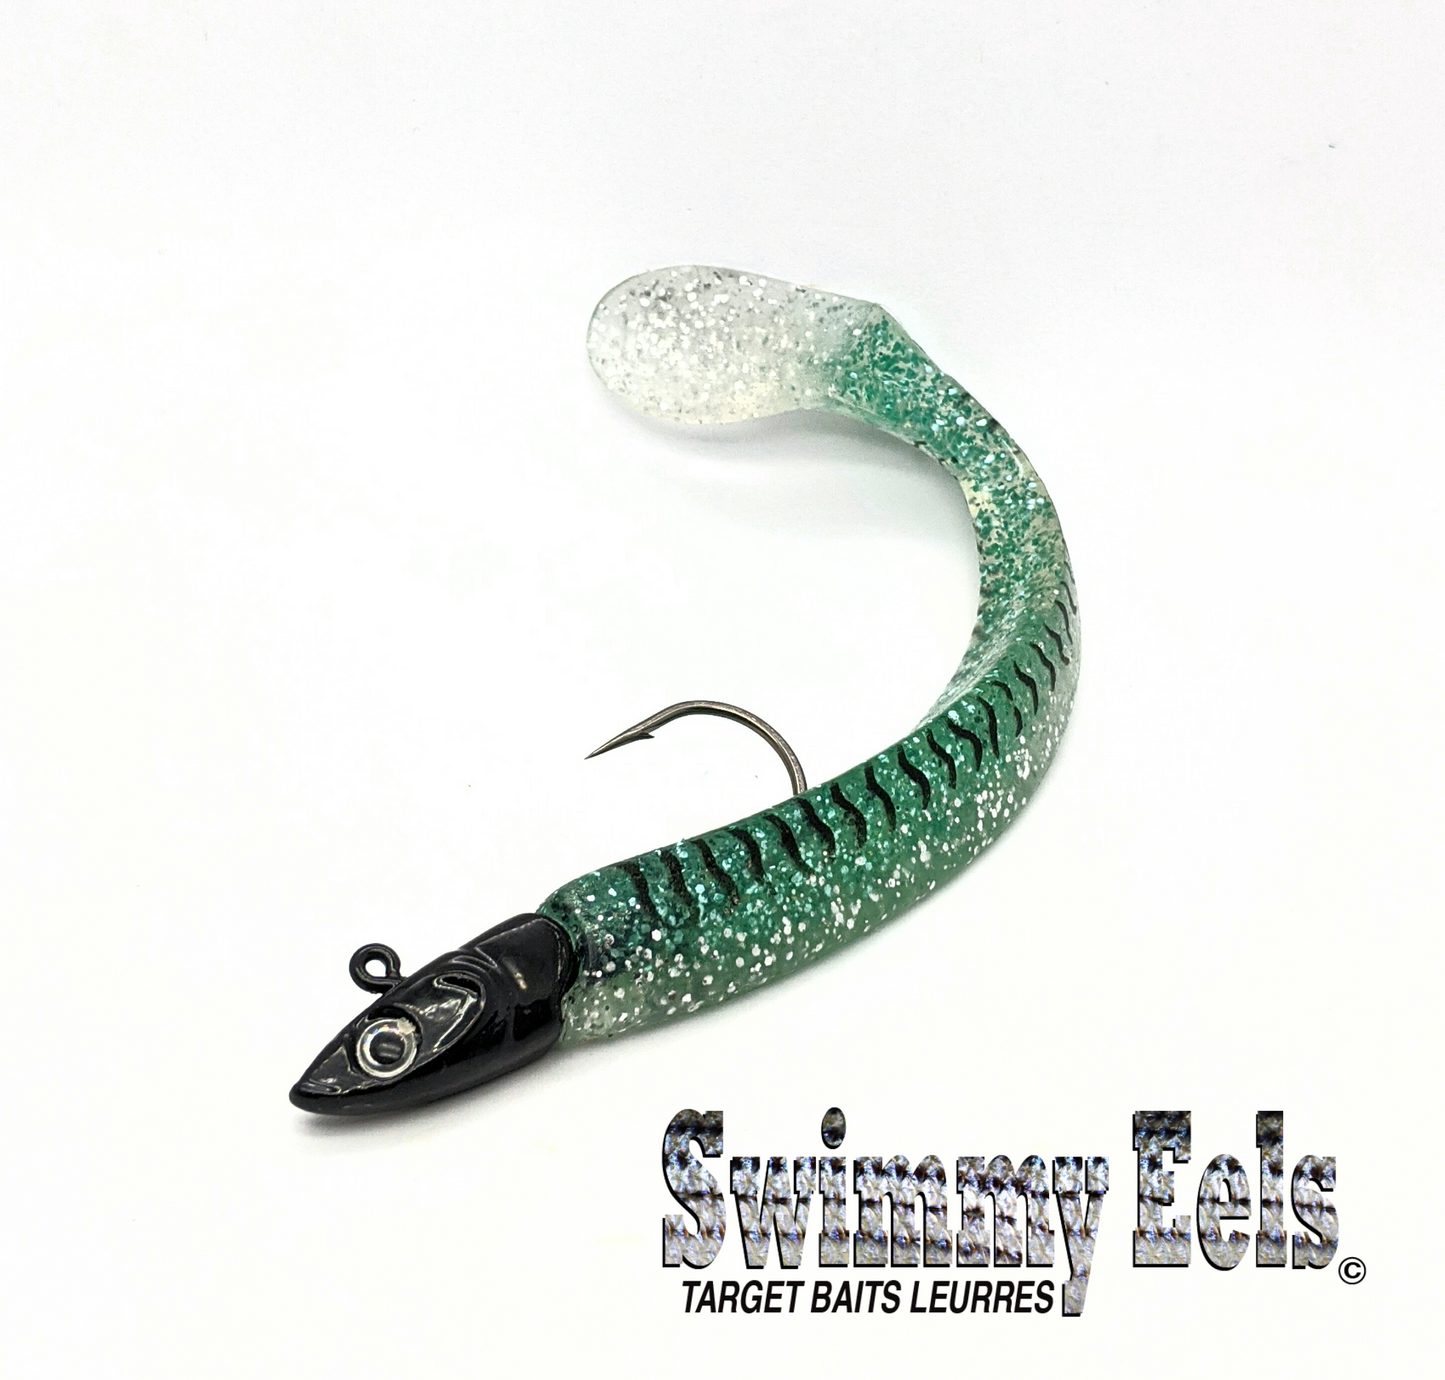 3 - Paddle Tail Frog Soft Plastic Fishing Baits Crappies, Walleyes Bass